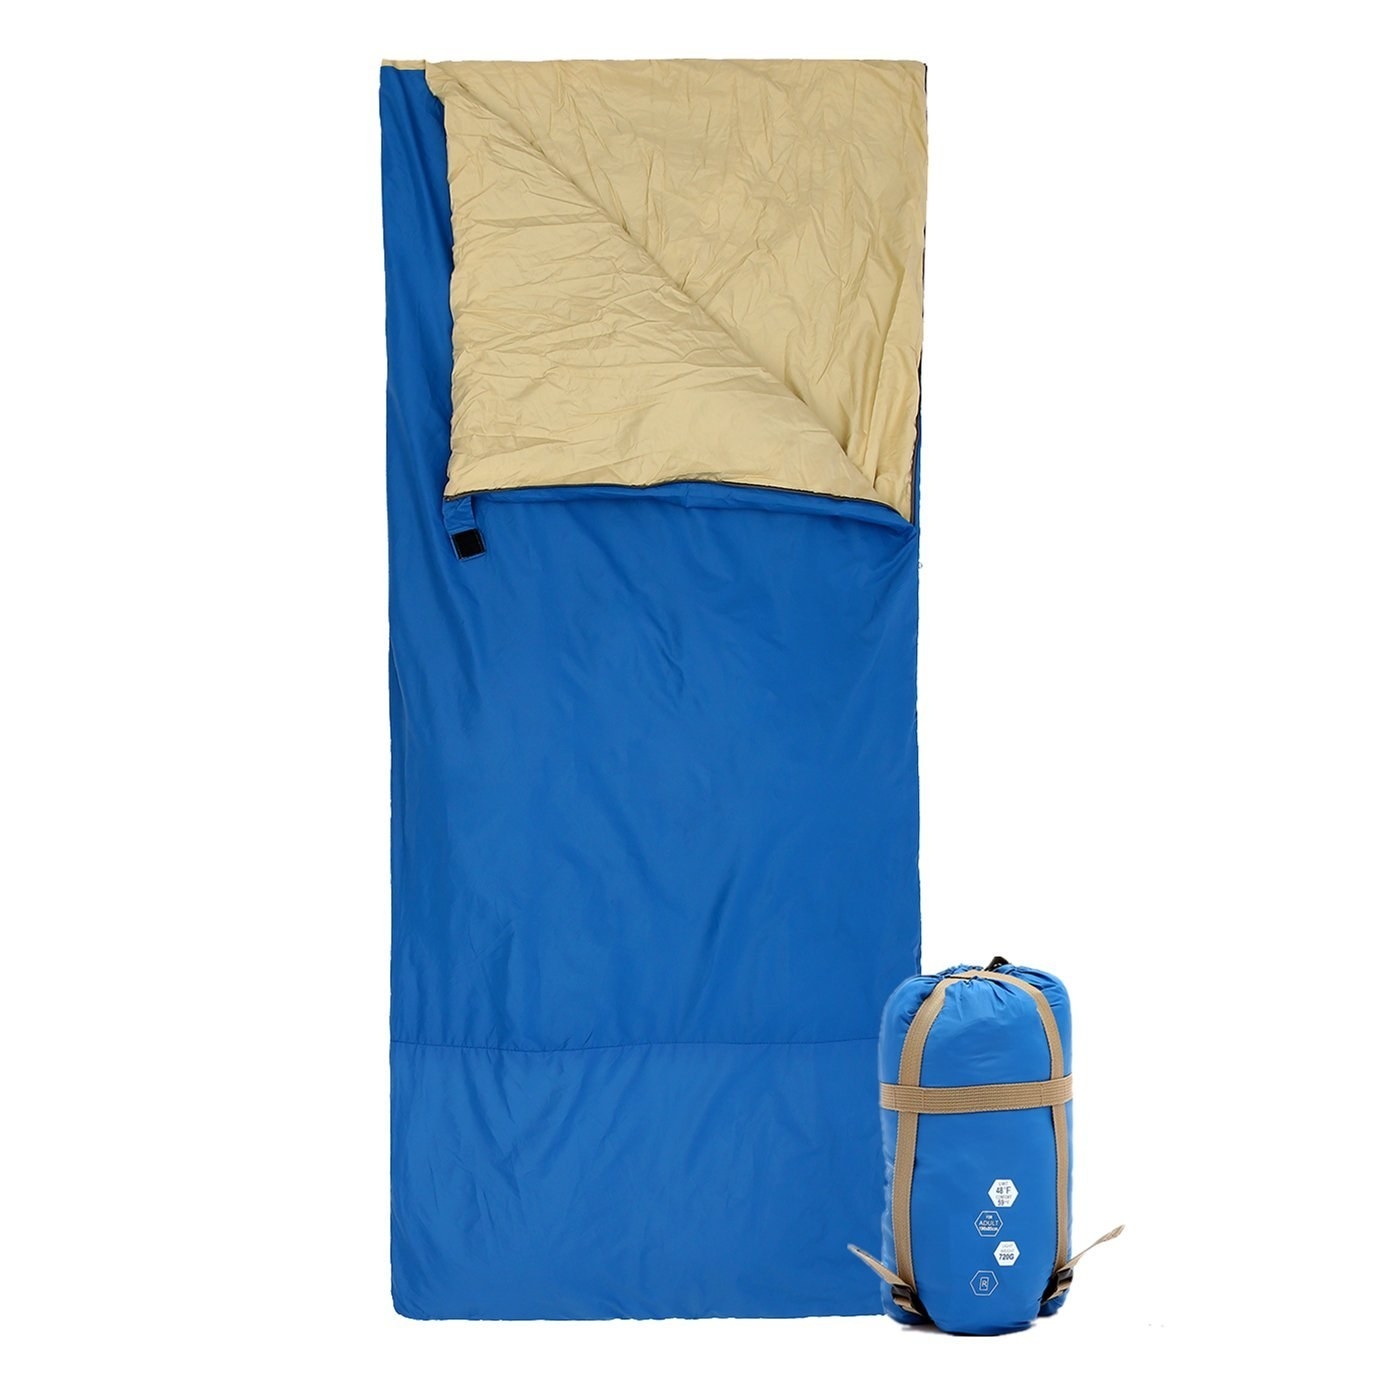 Buy Kefi Outdoors Sleeping Bag  Warm Lightweight with Wallet and Phone  Pocket Perfect for Camping TripsTravelling Trekking sleepovers Royal  Blue and Navy Online at Low Prices in India  Amazonin